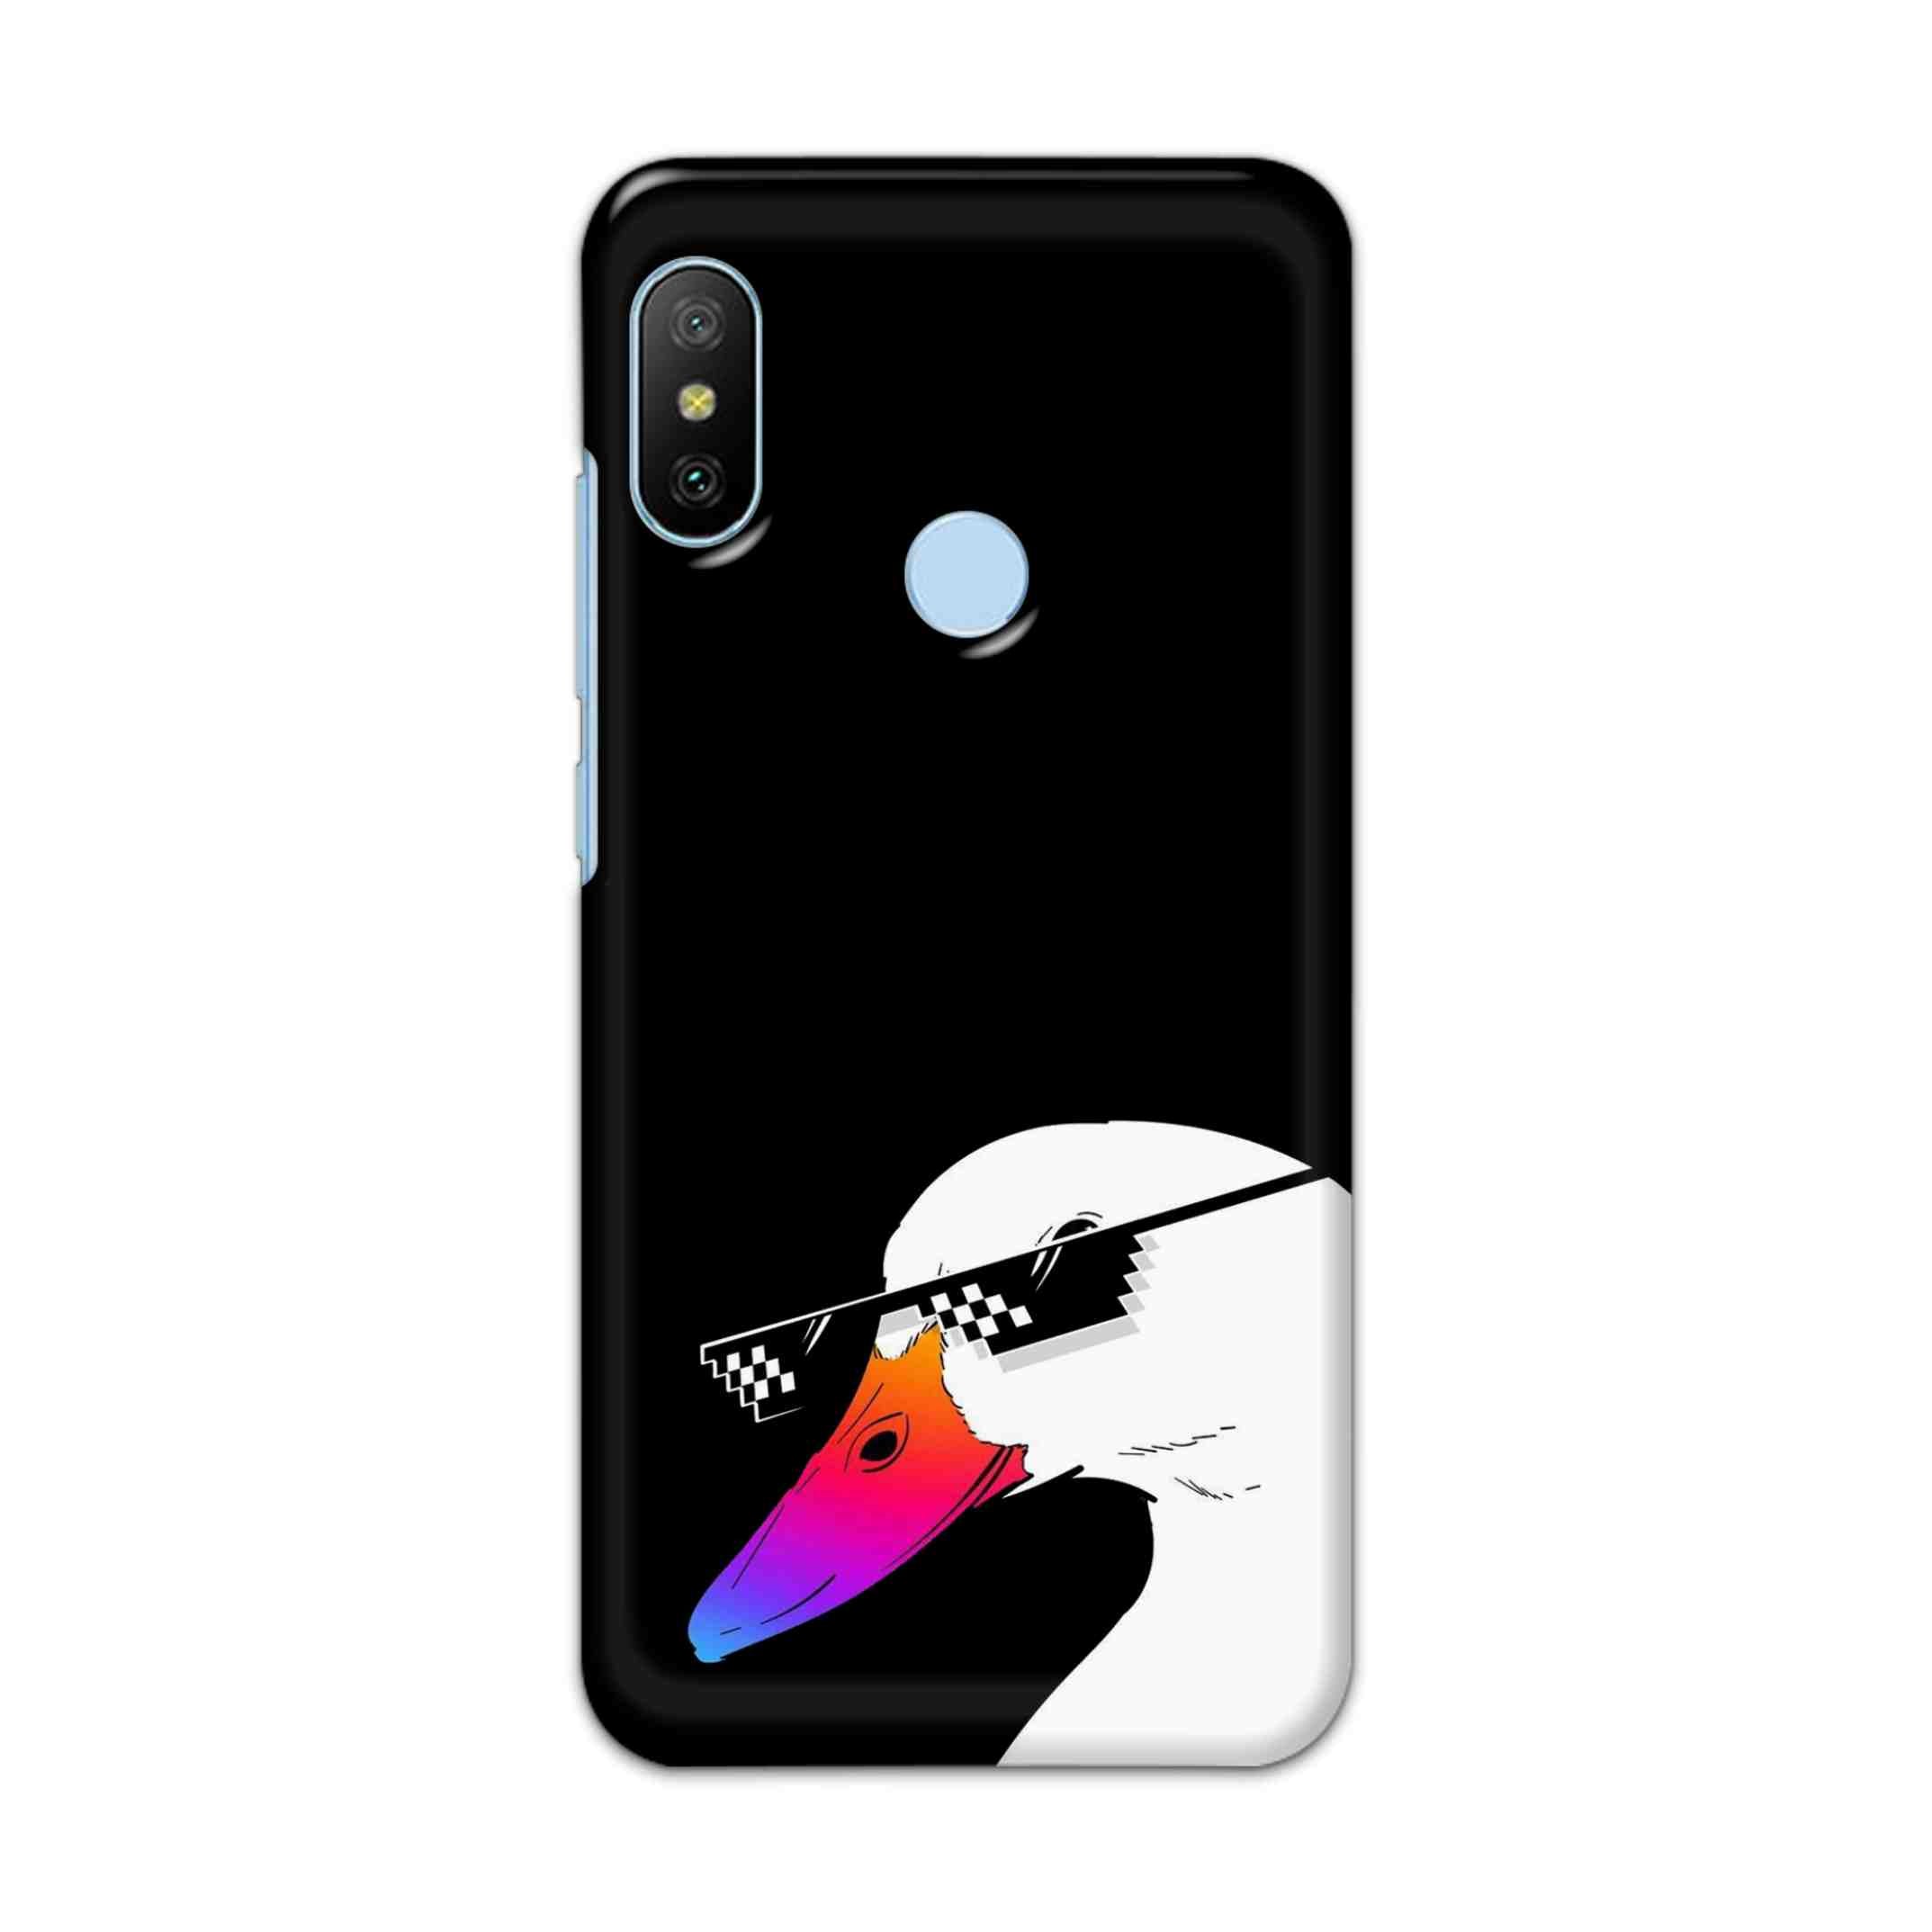 Buy Neon Duck Hard Back Mobile Phone Case/Cover For Xiaomi Redmi 6 Pro Online